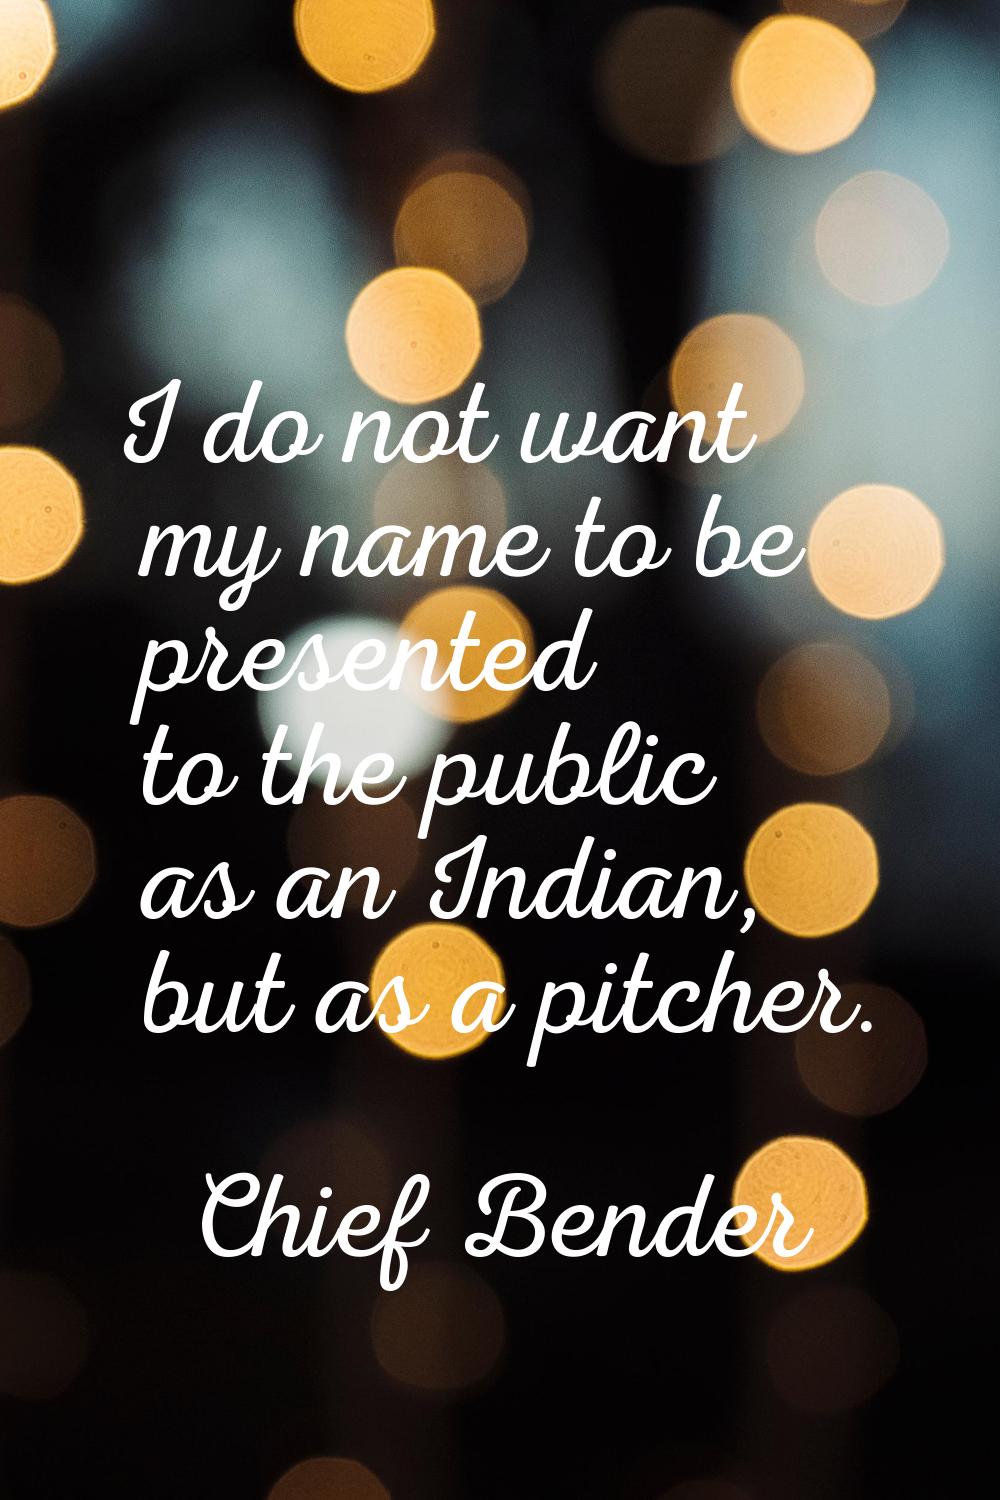 I do not want my name to be presented to the public as an Indian, but as a pitcher.